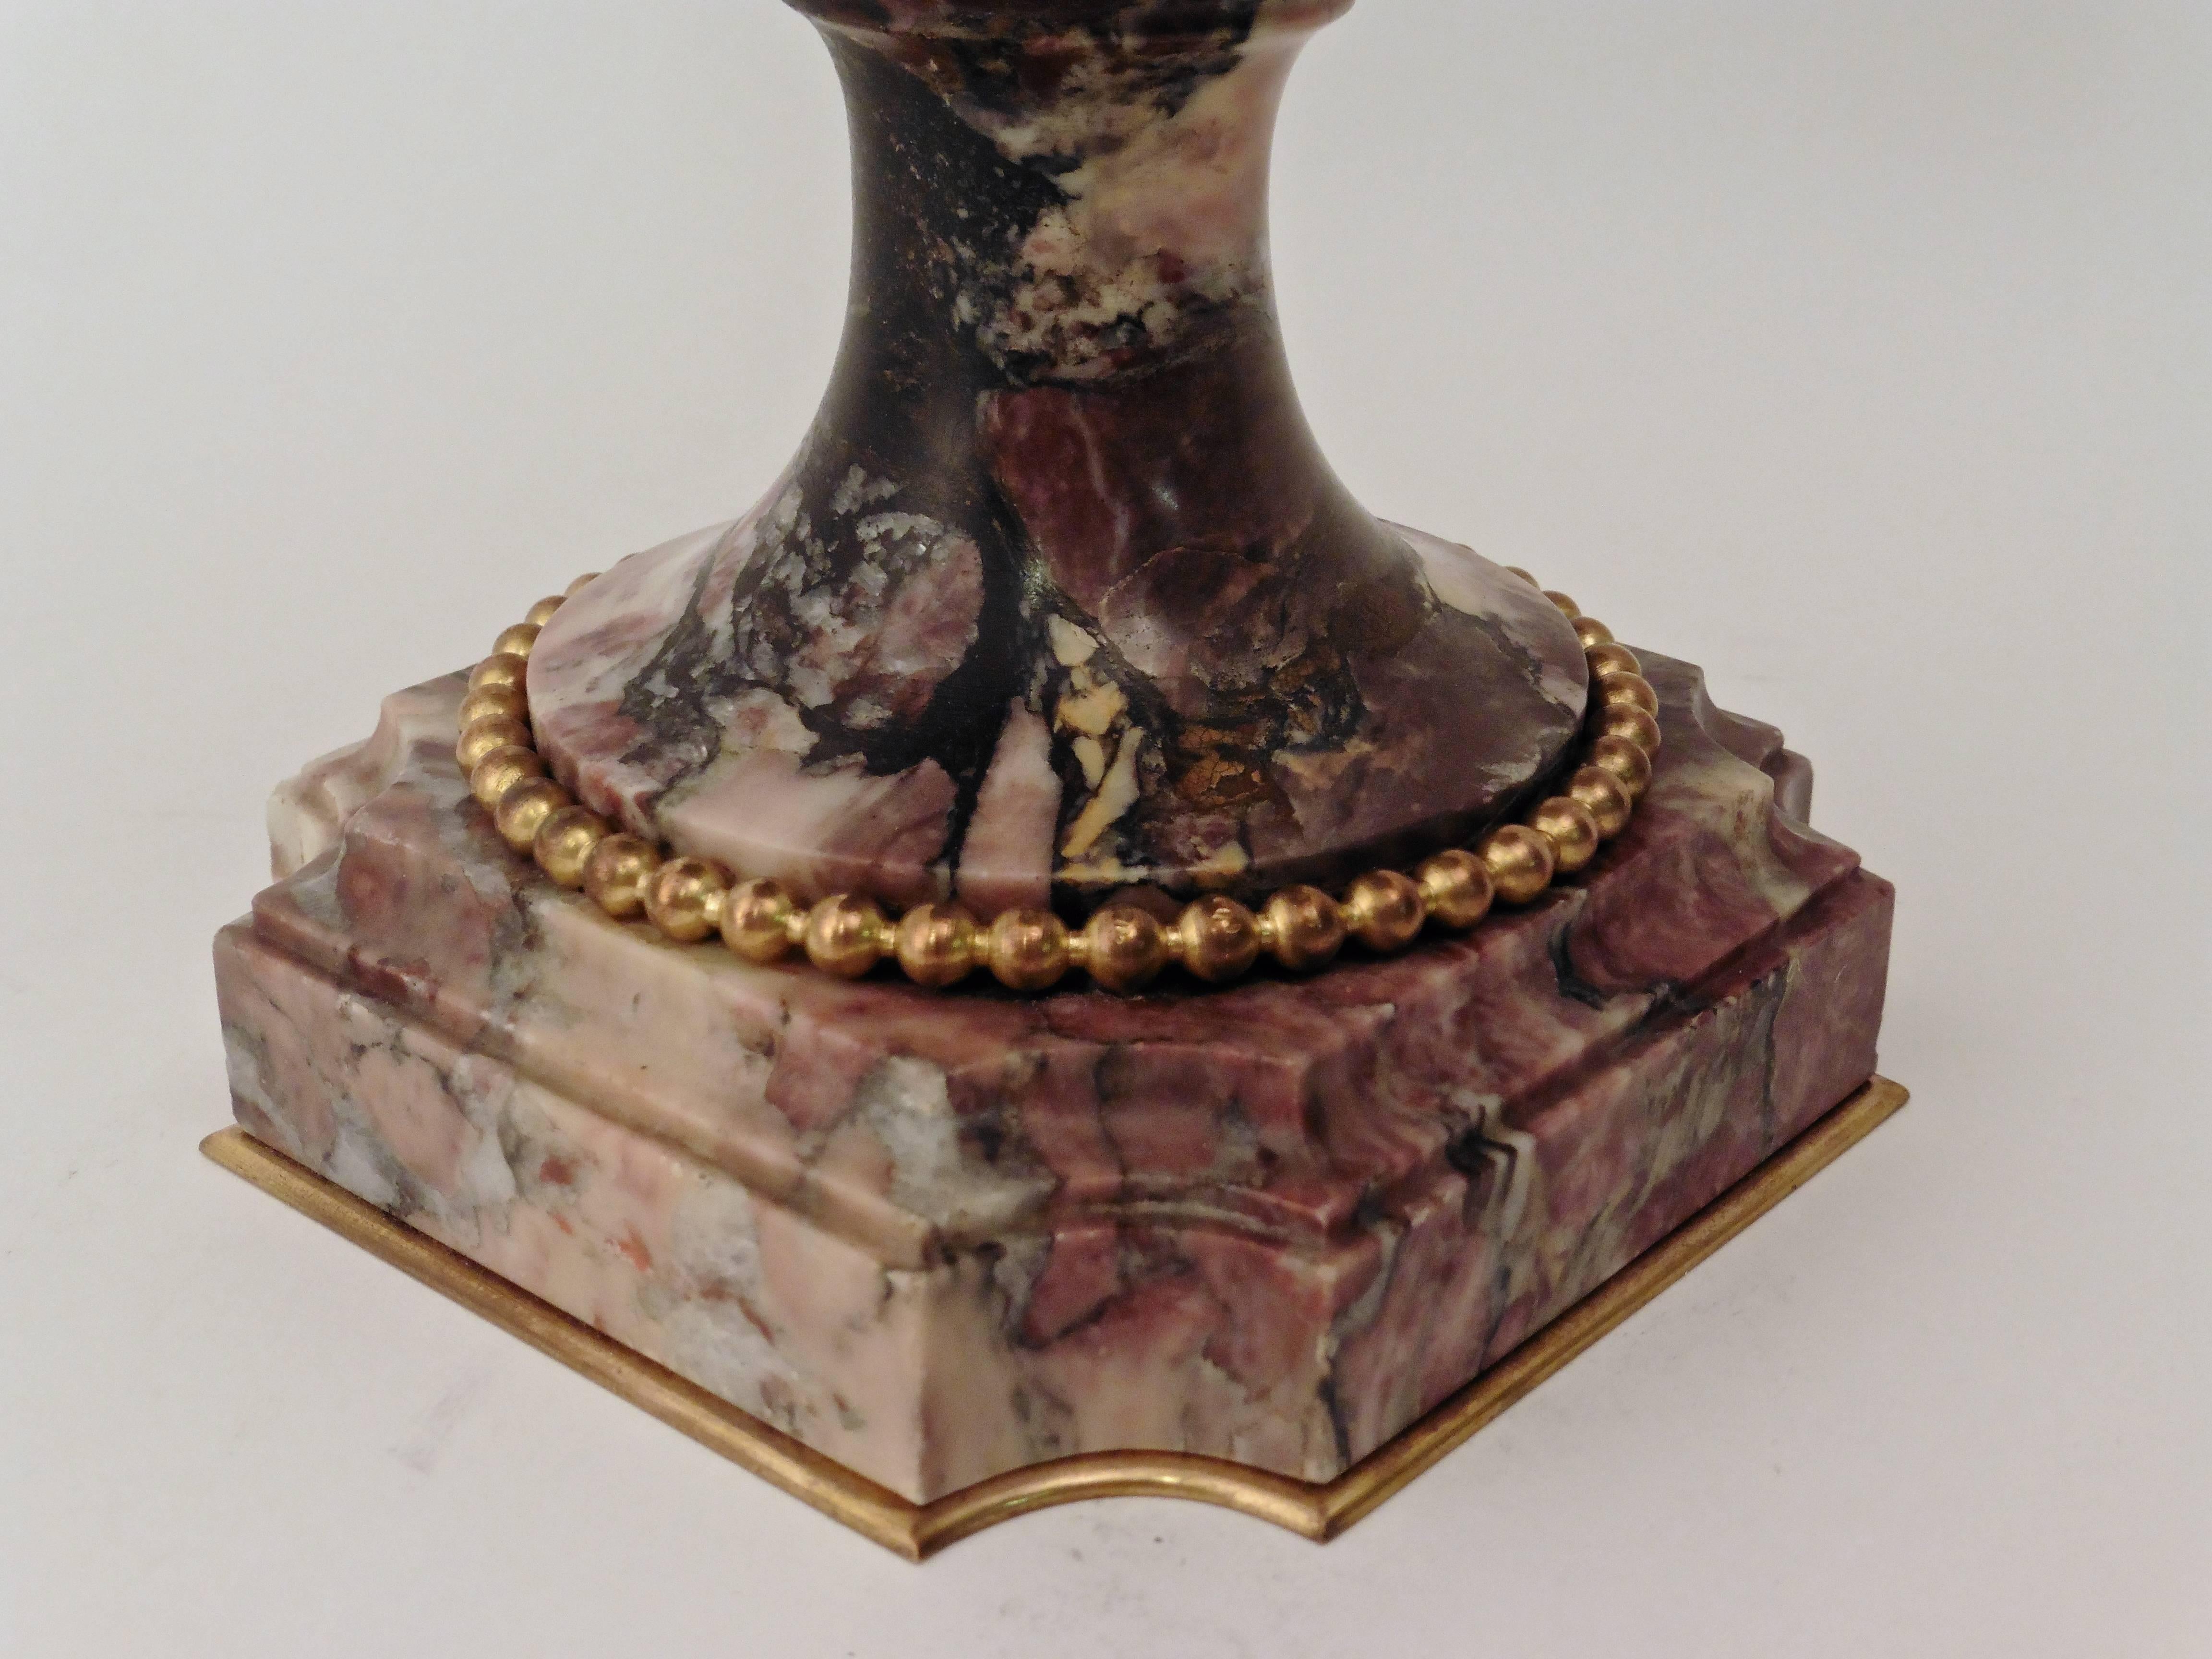 Pair of French ormolu-mounted ‘Breche Violette’ marble urns and covers, stamped ‘Susse Freres’ (Parisian foundry), circa 1880. Each Urn on stepped marble plinths with ormolu beading. Flanked by over scale acanthus leaf mounts. Marble lid finished